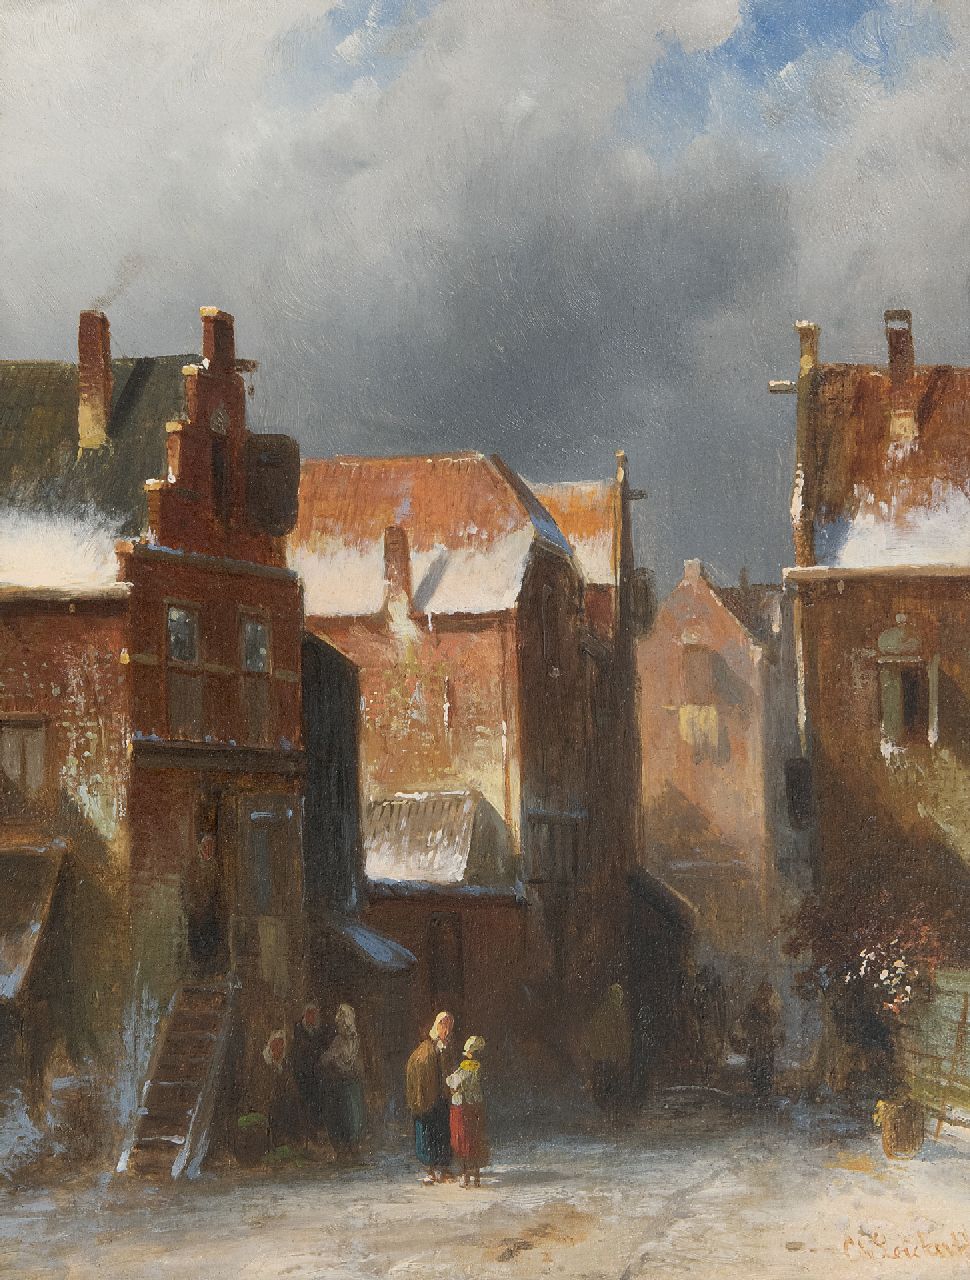 Leickert C.H.J.  | 'Charles' Henri Joseph Leickert | Paintings offered for sale | Figures in a snow-covered town, oil on panel 27.2 x 21.6 cm, signed l.r.